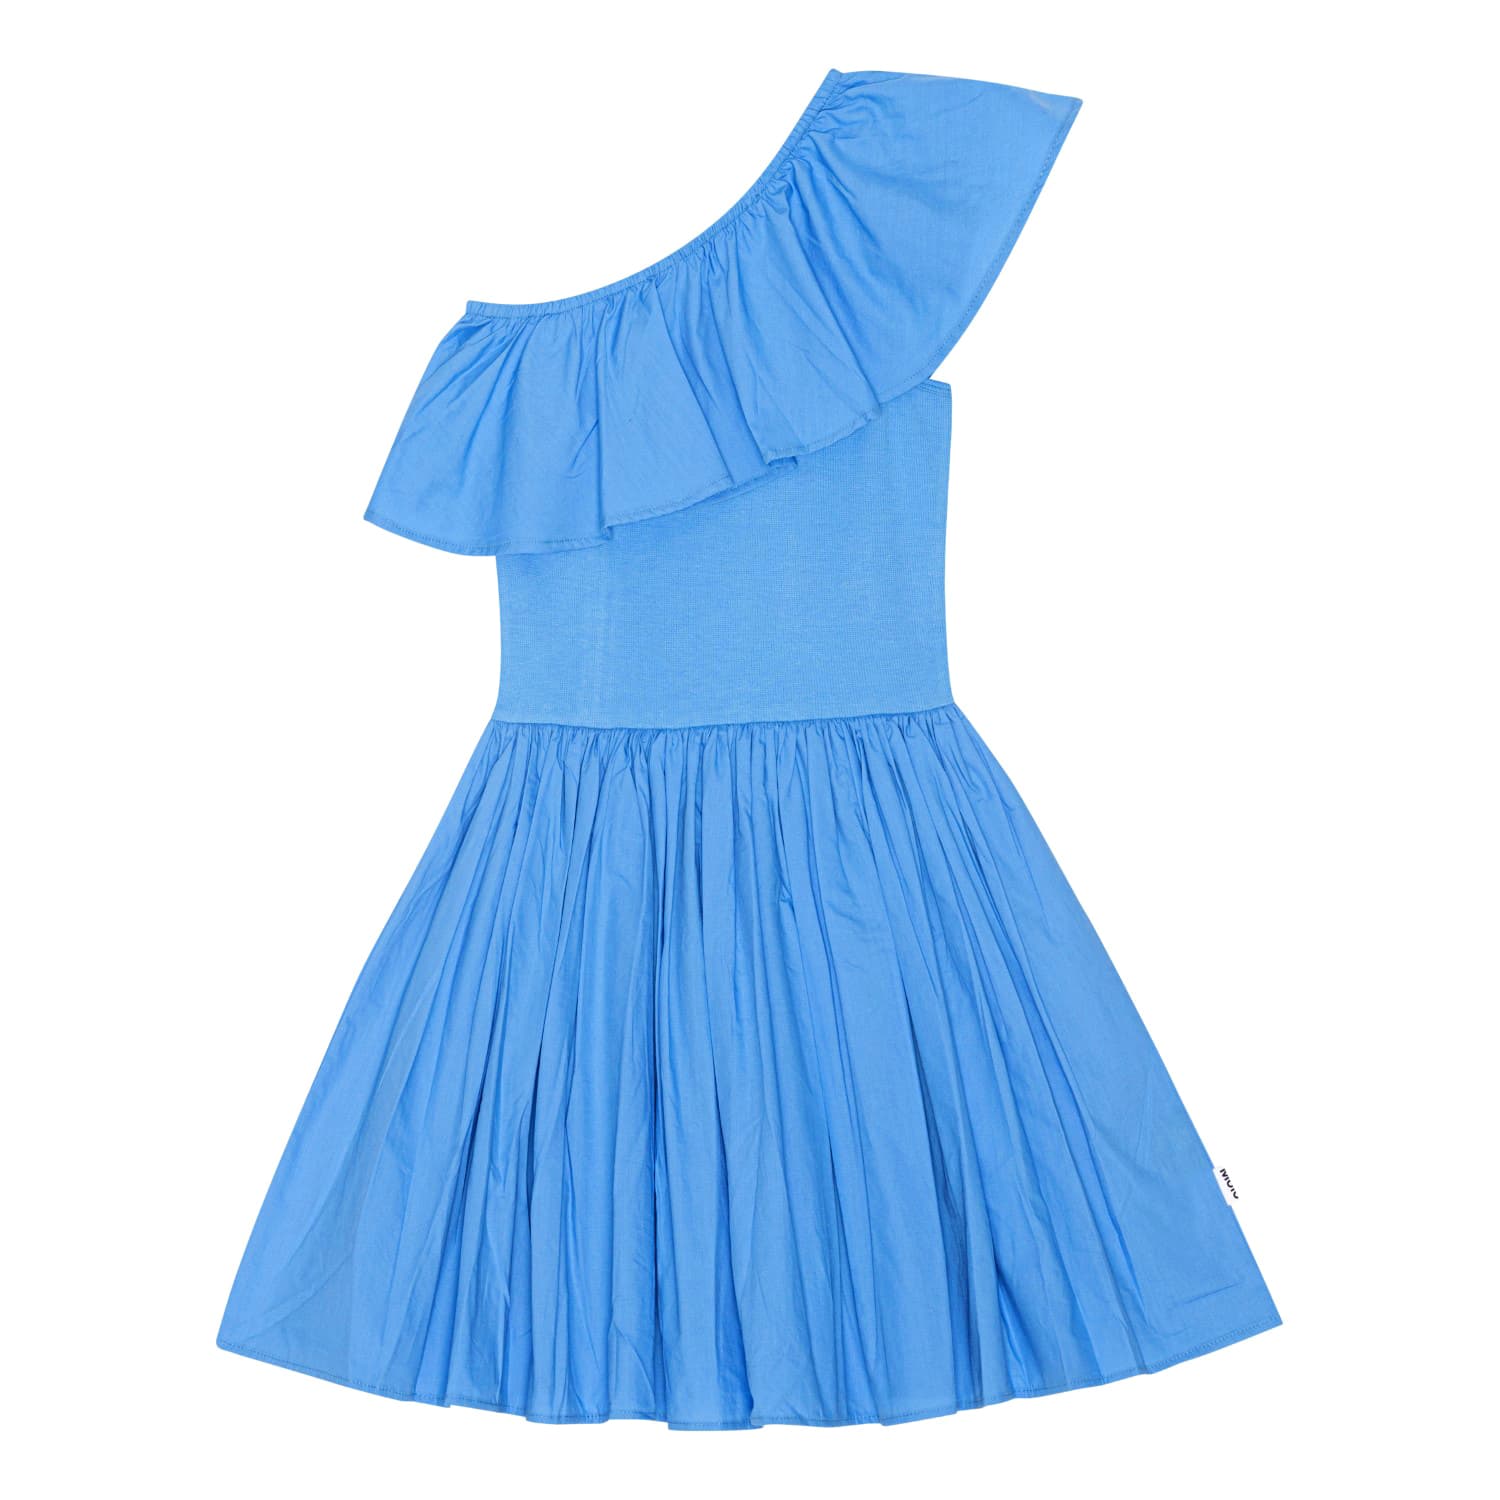 Chloey Dress (Forget Me Not)